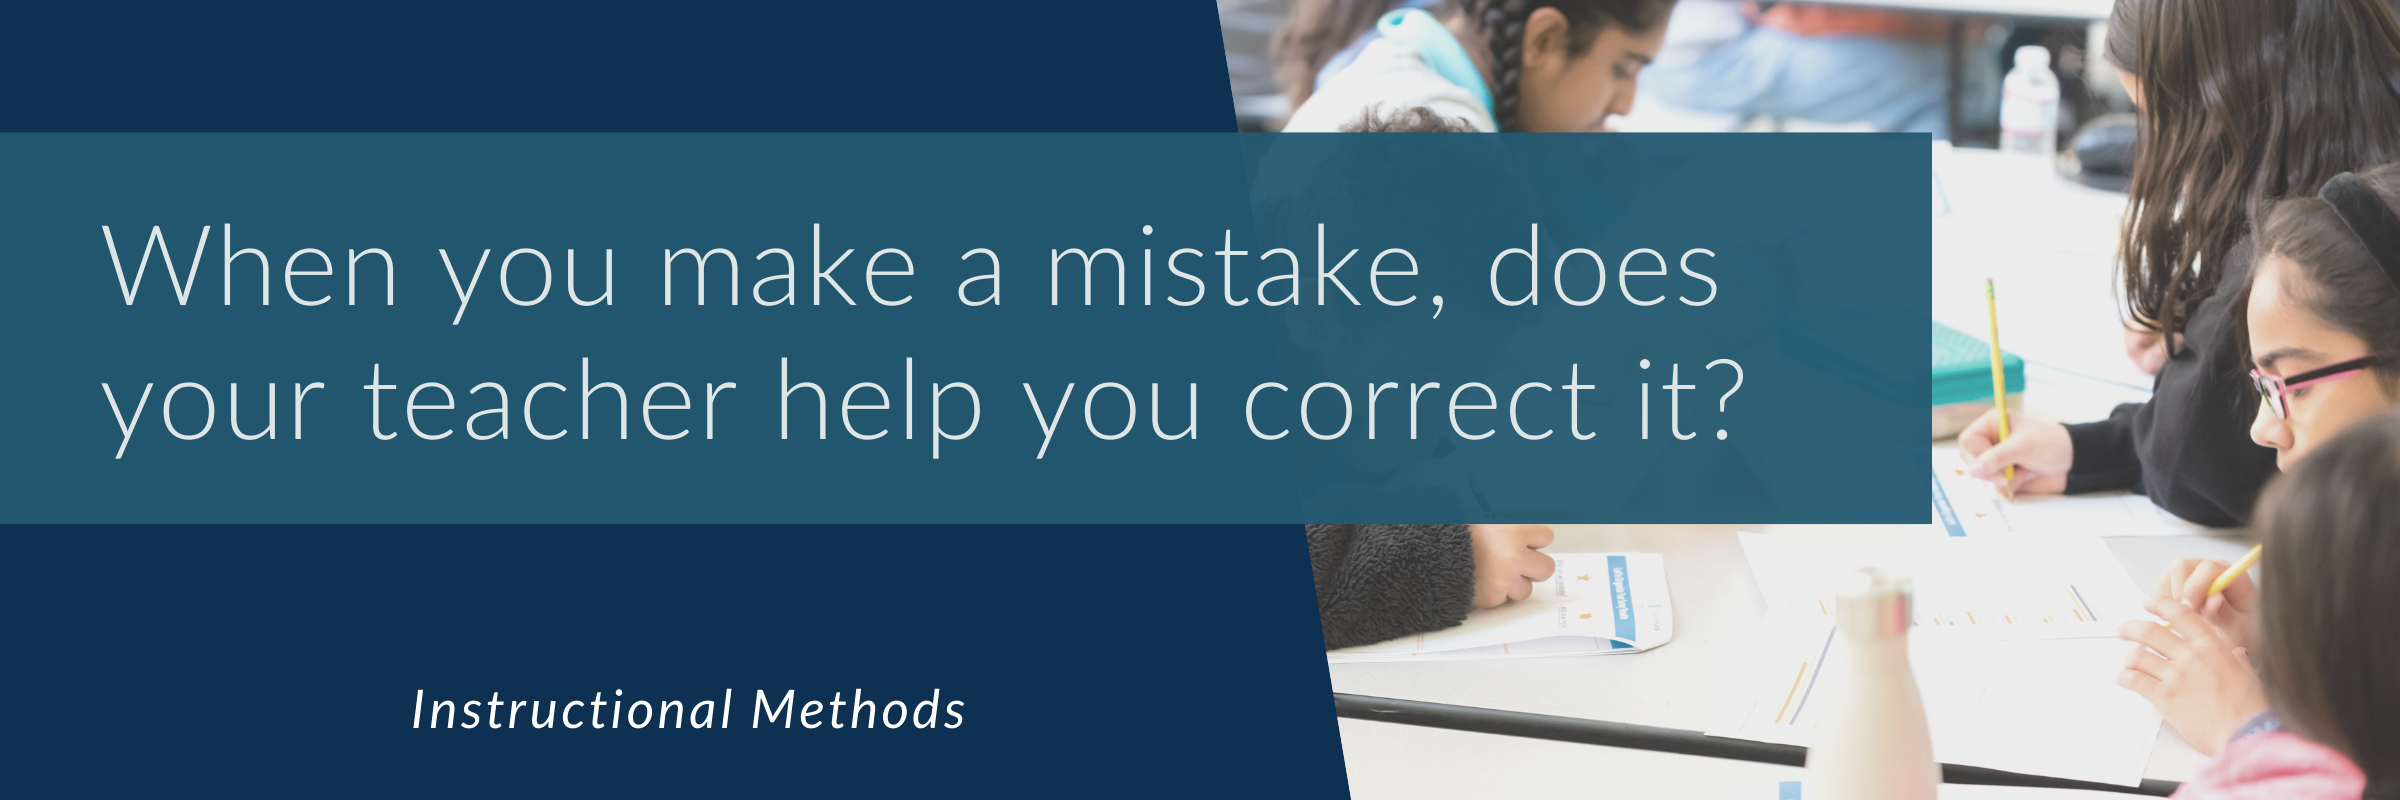 When you make a mistake, does your teacher help you correct it?